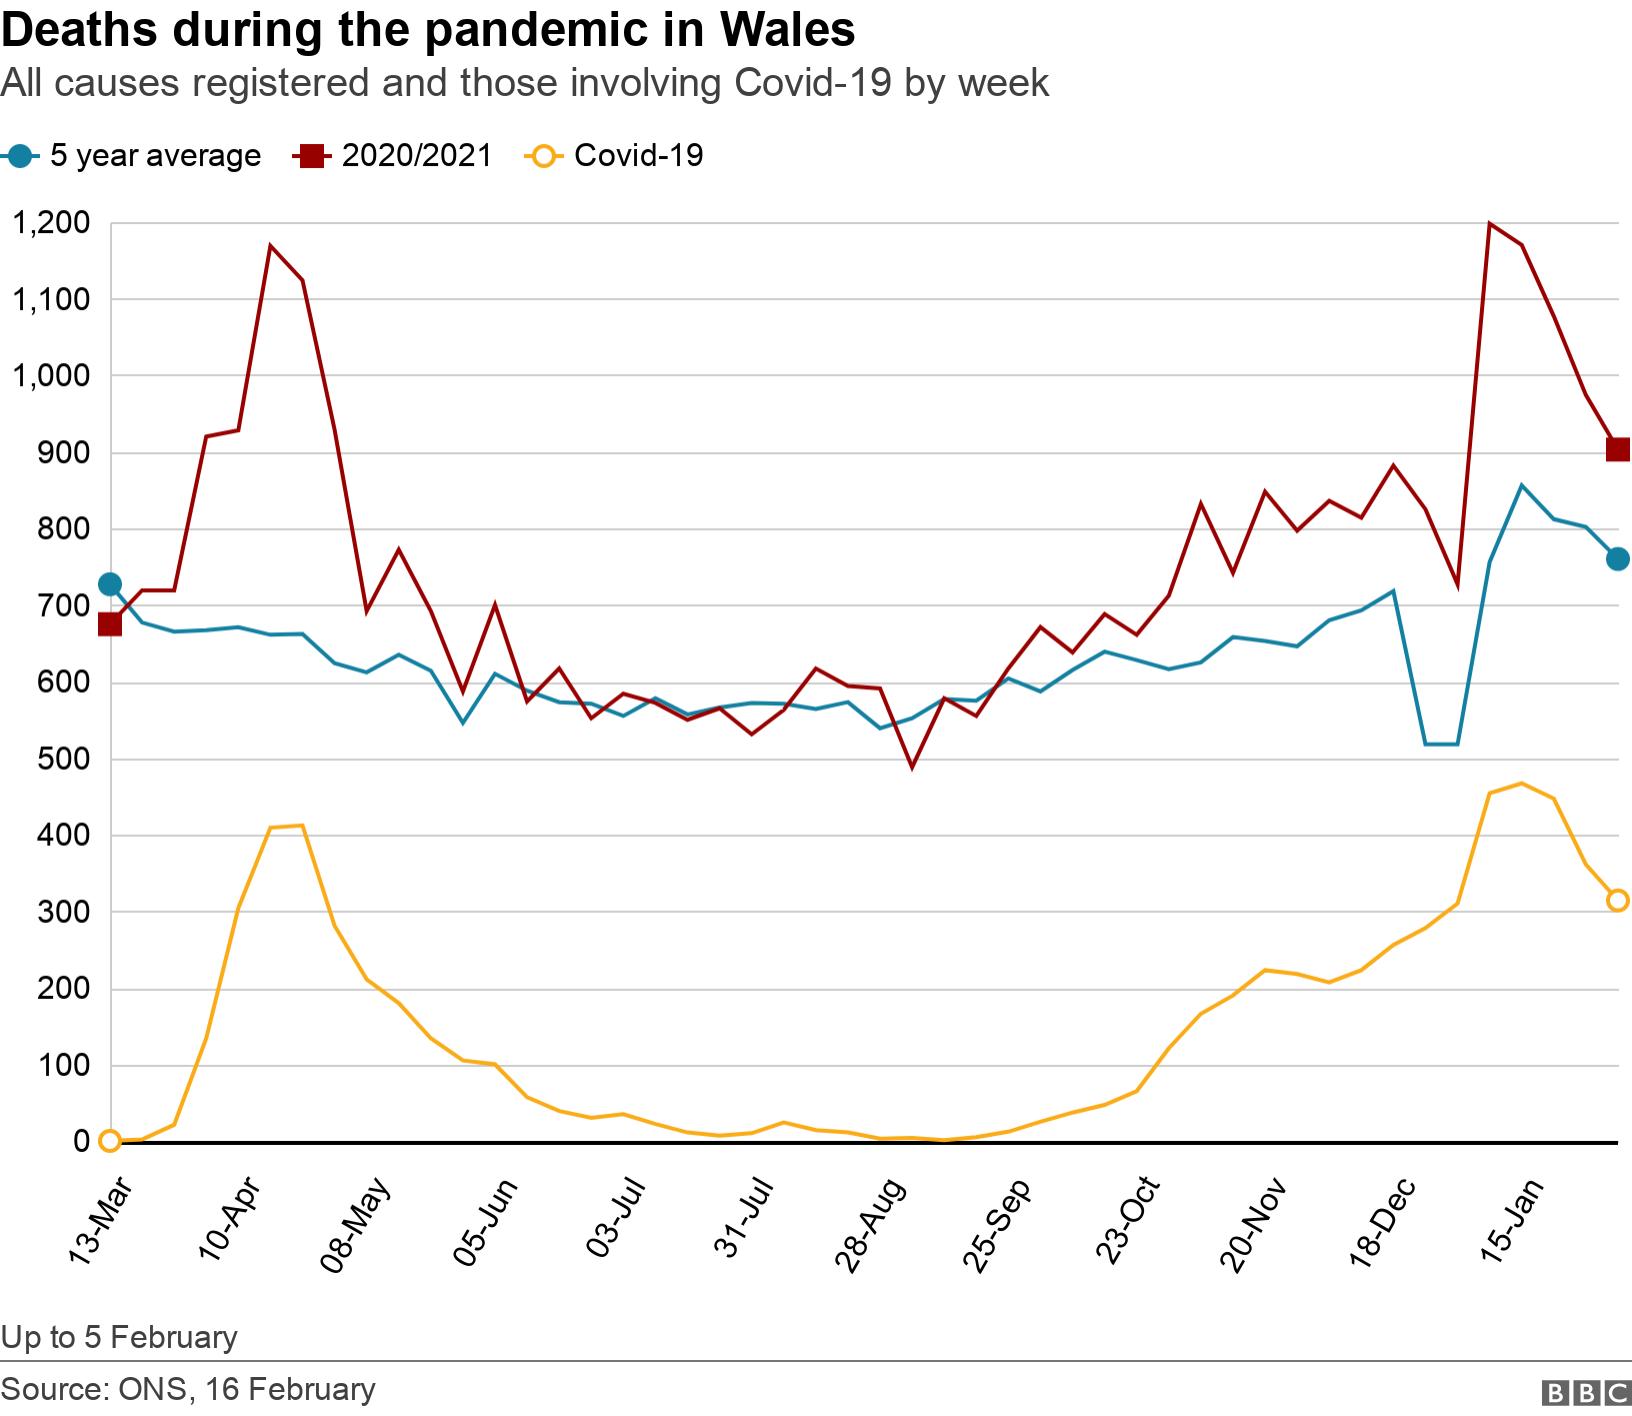 Deaths during the pandemic in Wales. All causes registered and those involving Covid-19 by week.  Up to 5 February.